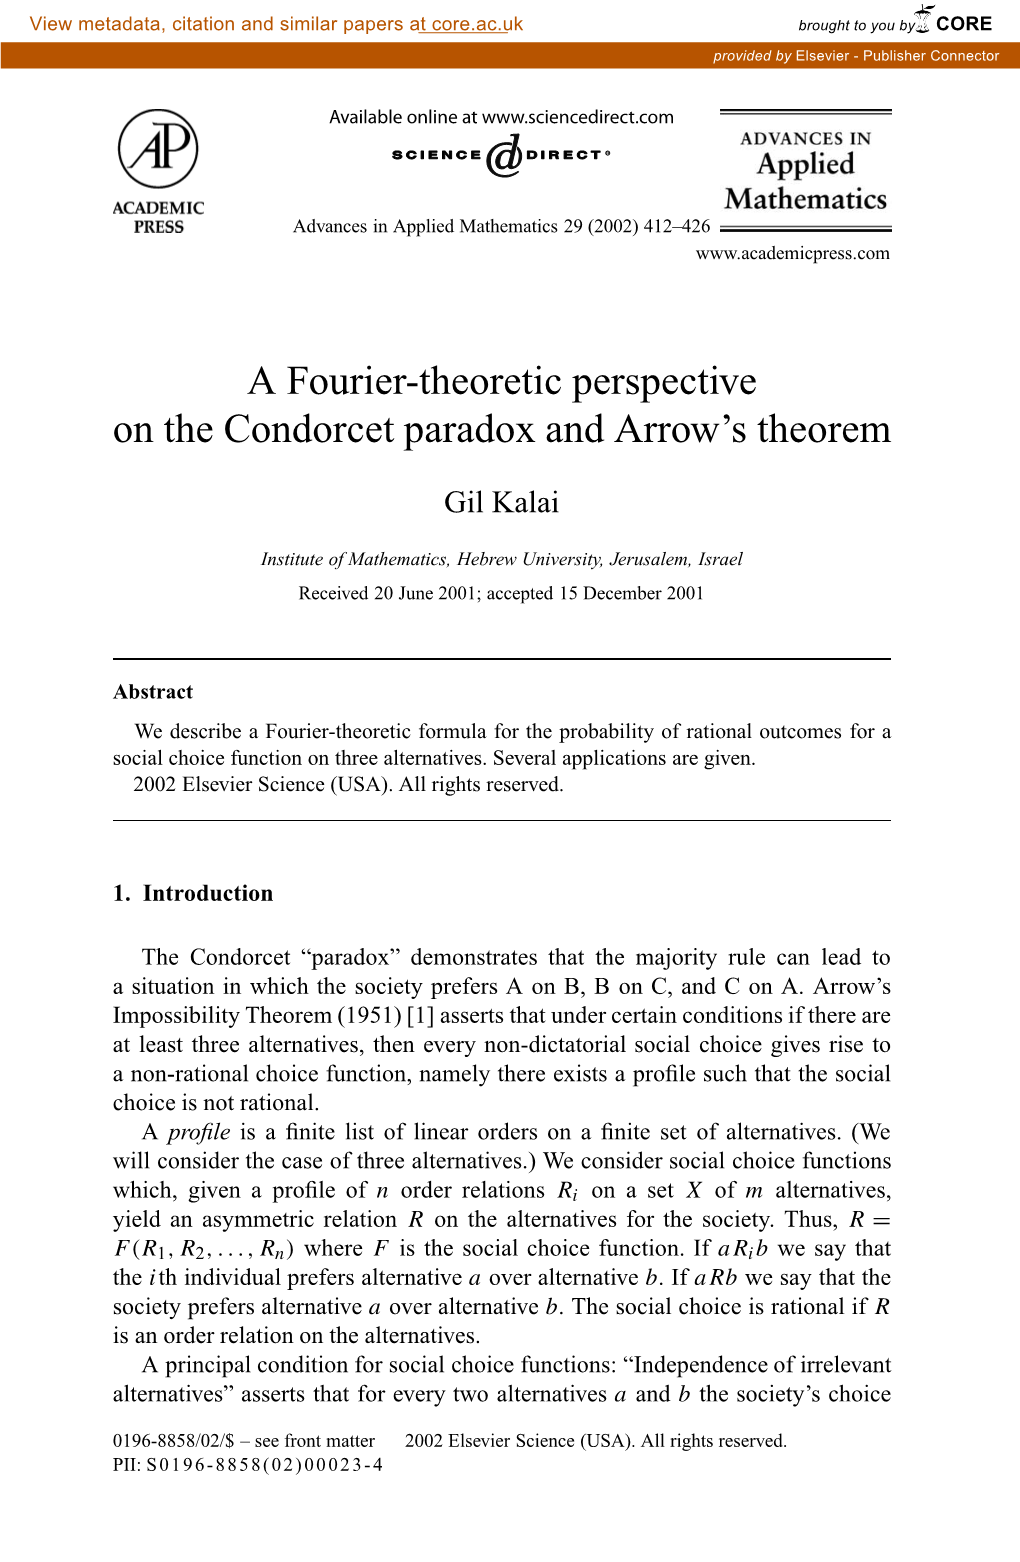 A Fourier-Theoretic Perspective on the Condorcet Paradox and Arrow's